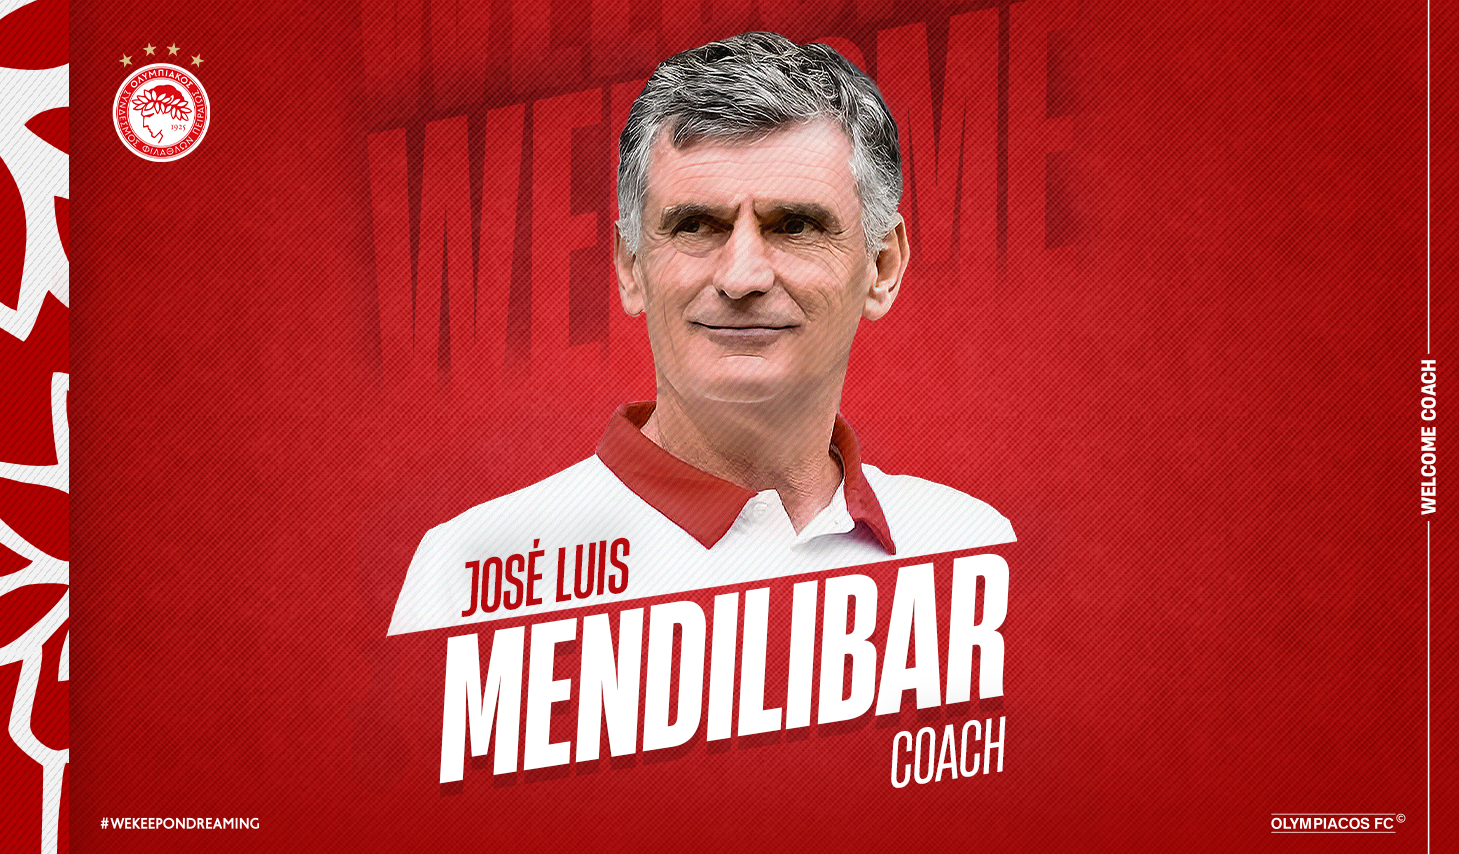 José Luis Mendilibar is the new coach of Olympiacos